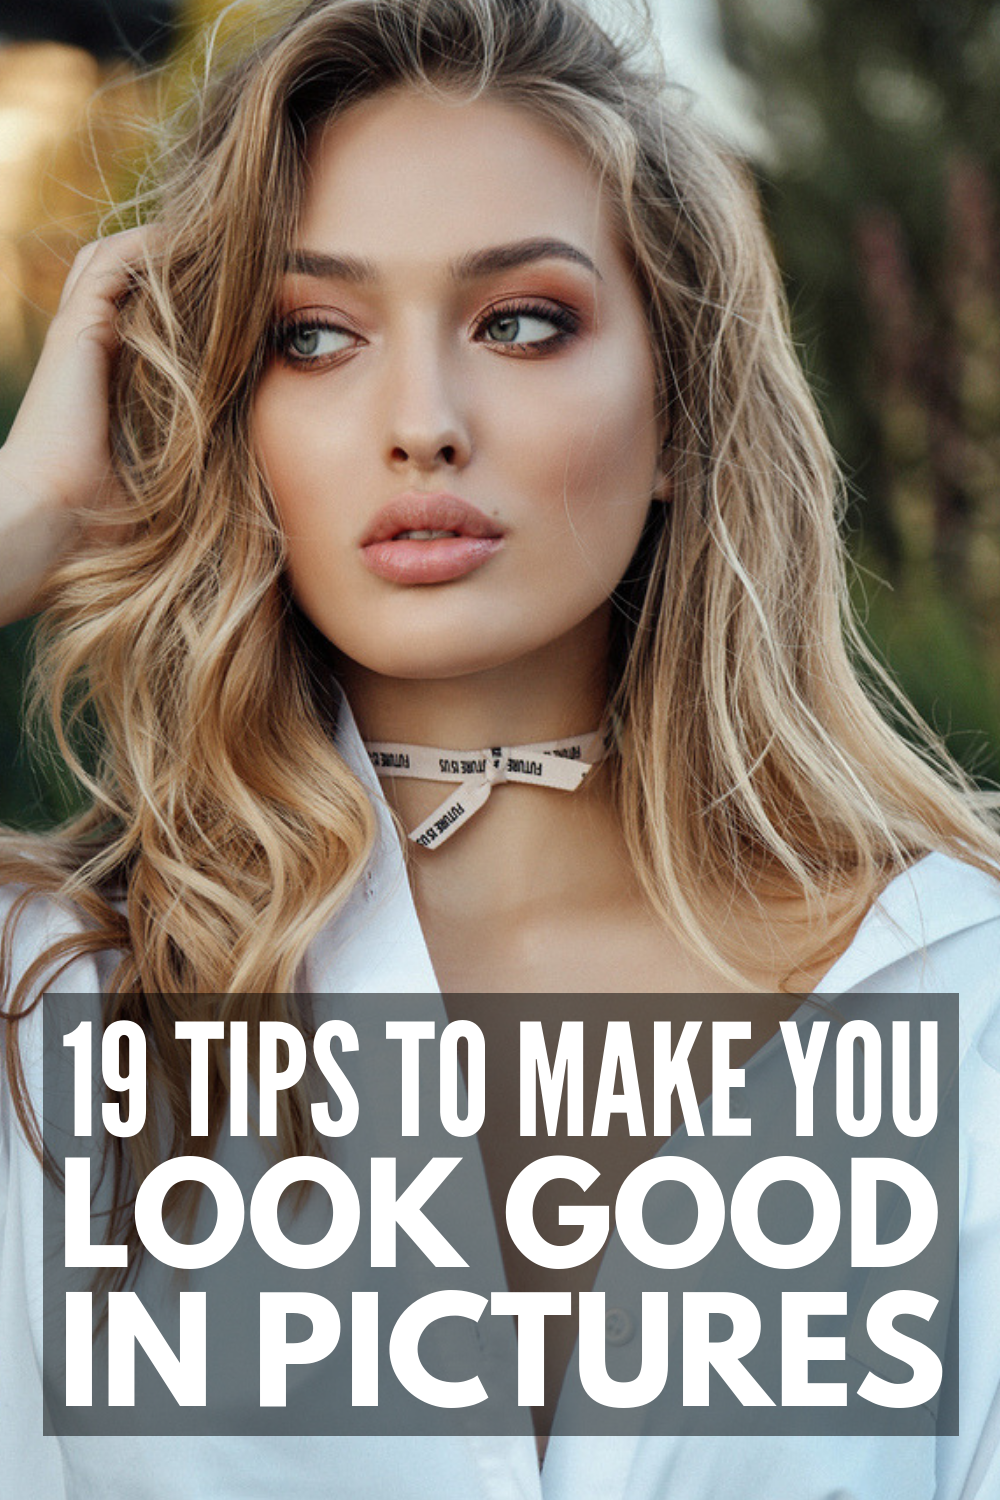 How to Look Good in Pictures: 19 Tips to Be More Photogenic - How to Look Good in Pictures: 19 Tips to Be More Photogenic -   18 diy Makeup for photoshoot ideas